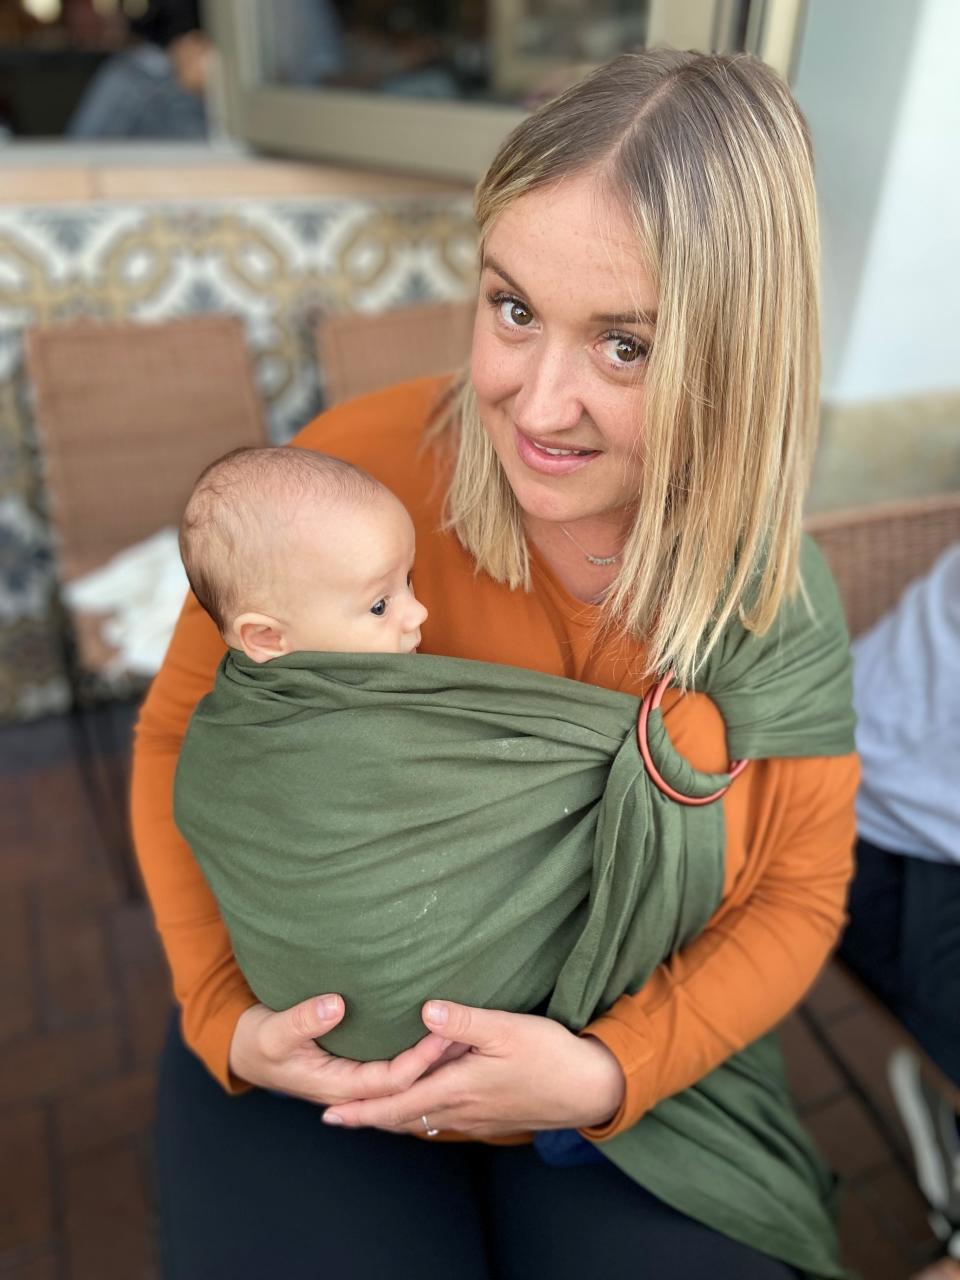 Veronica Nolan of Carlsbad, California holds her baby, James Leo. She was one of the first mothers to use the Emulait baby bottle.